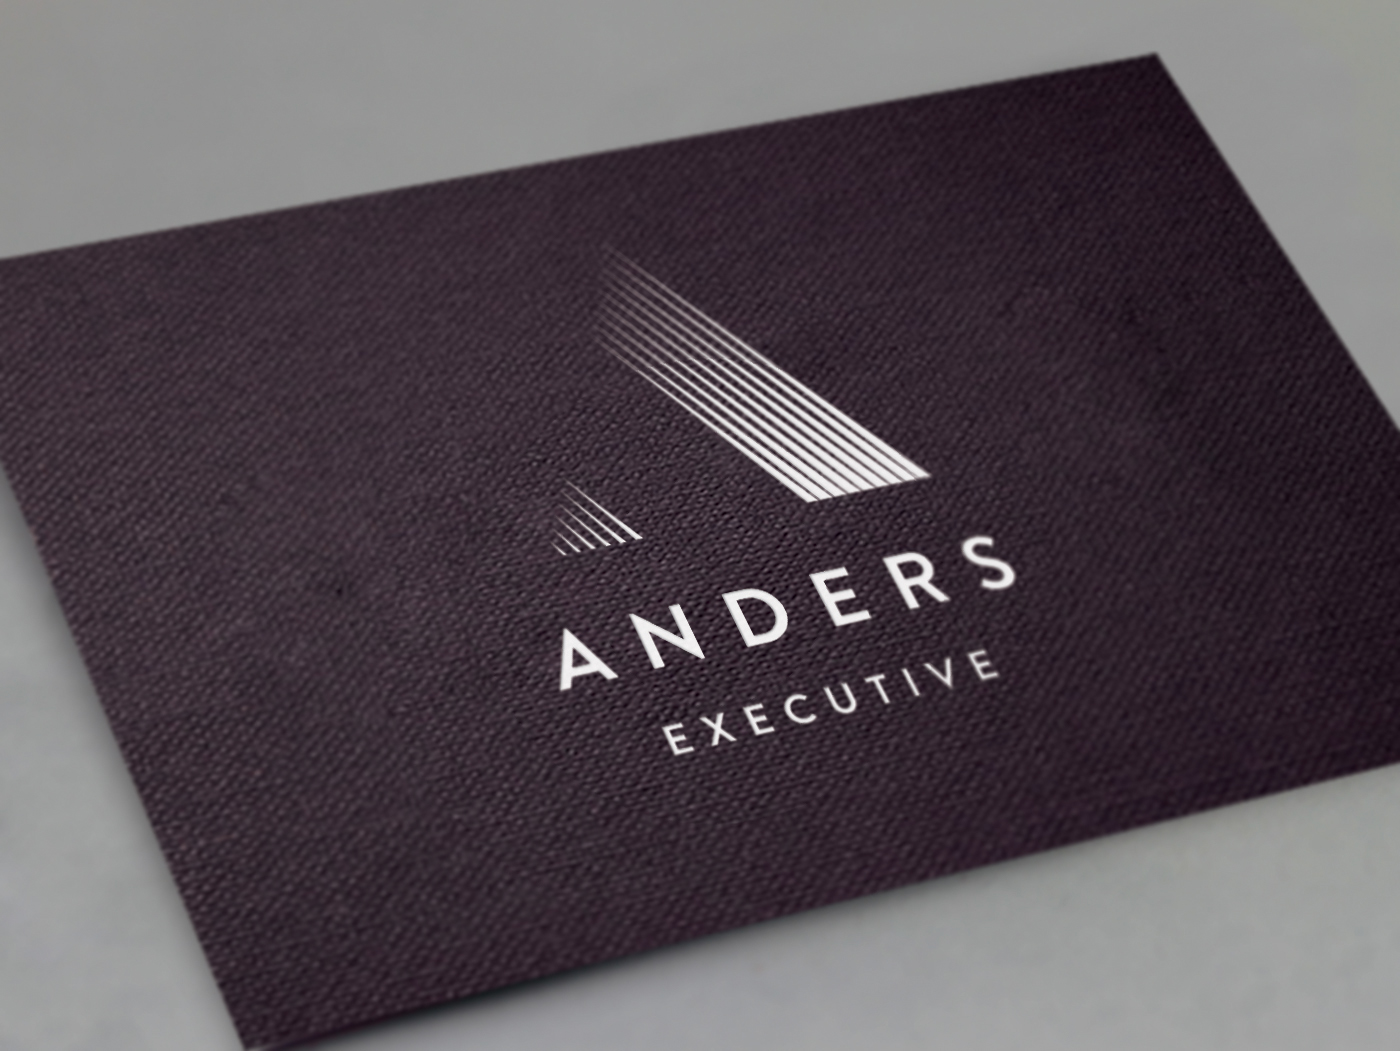 Anders Executive Anders Executive Branding Recruitment Branding recruitment recruitment logo recruitment website executive branding Logo and website